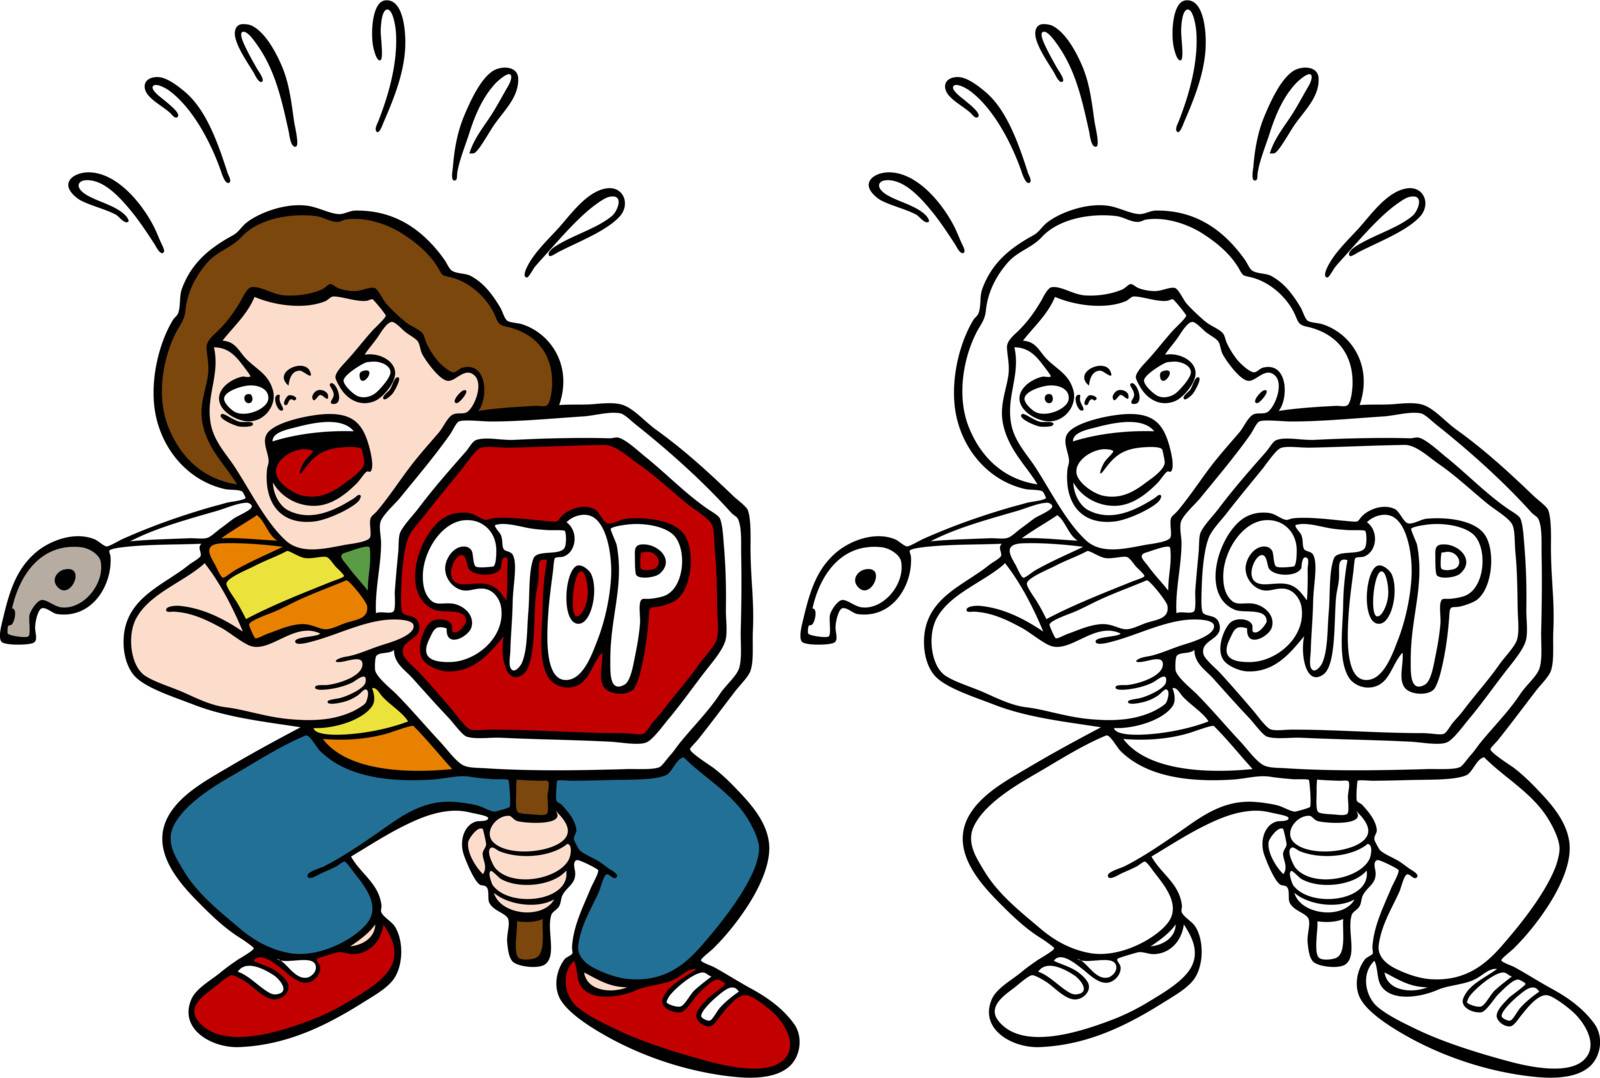 Angry crossing guard shouts and points at a stop sign - both color and black / white versions.